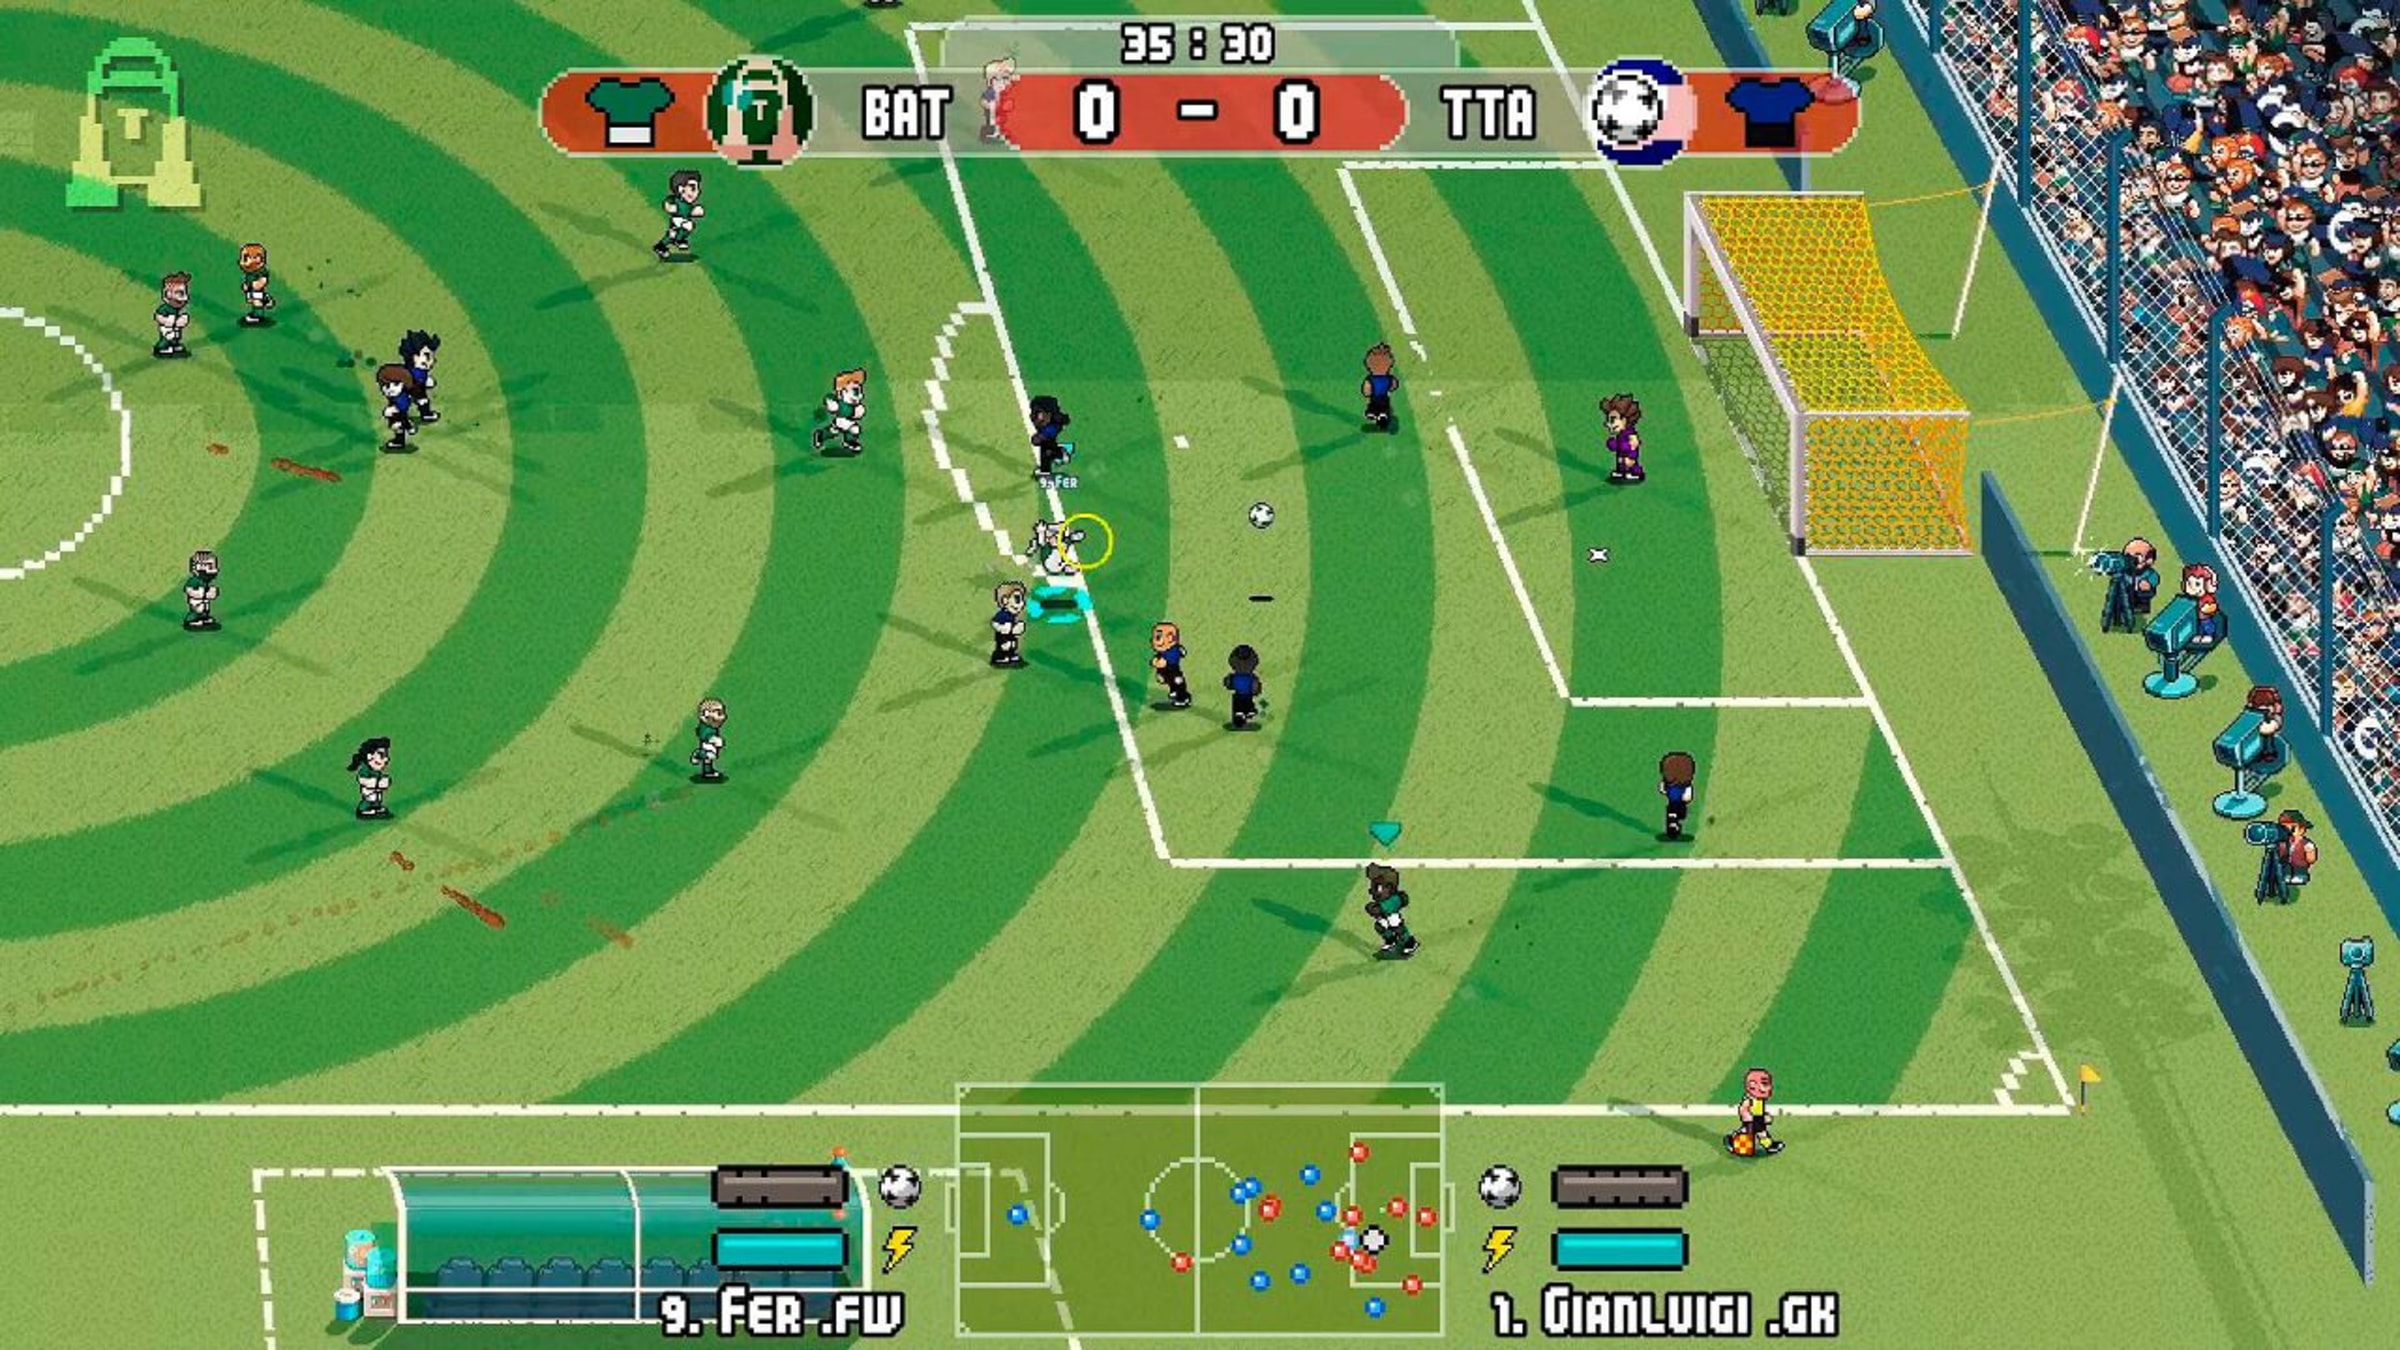 https://assets.nintendo.com/image/upload/c_fill,w_1200/q_auto:best/f_auto/dpr_2.0/ncom/en_US/games/switch/p/pixel-cup-soccer-ultimate-edition-switch/